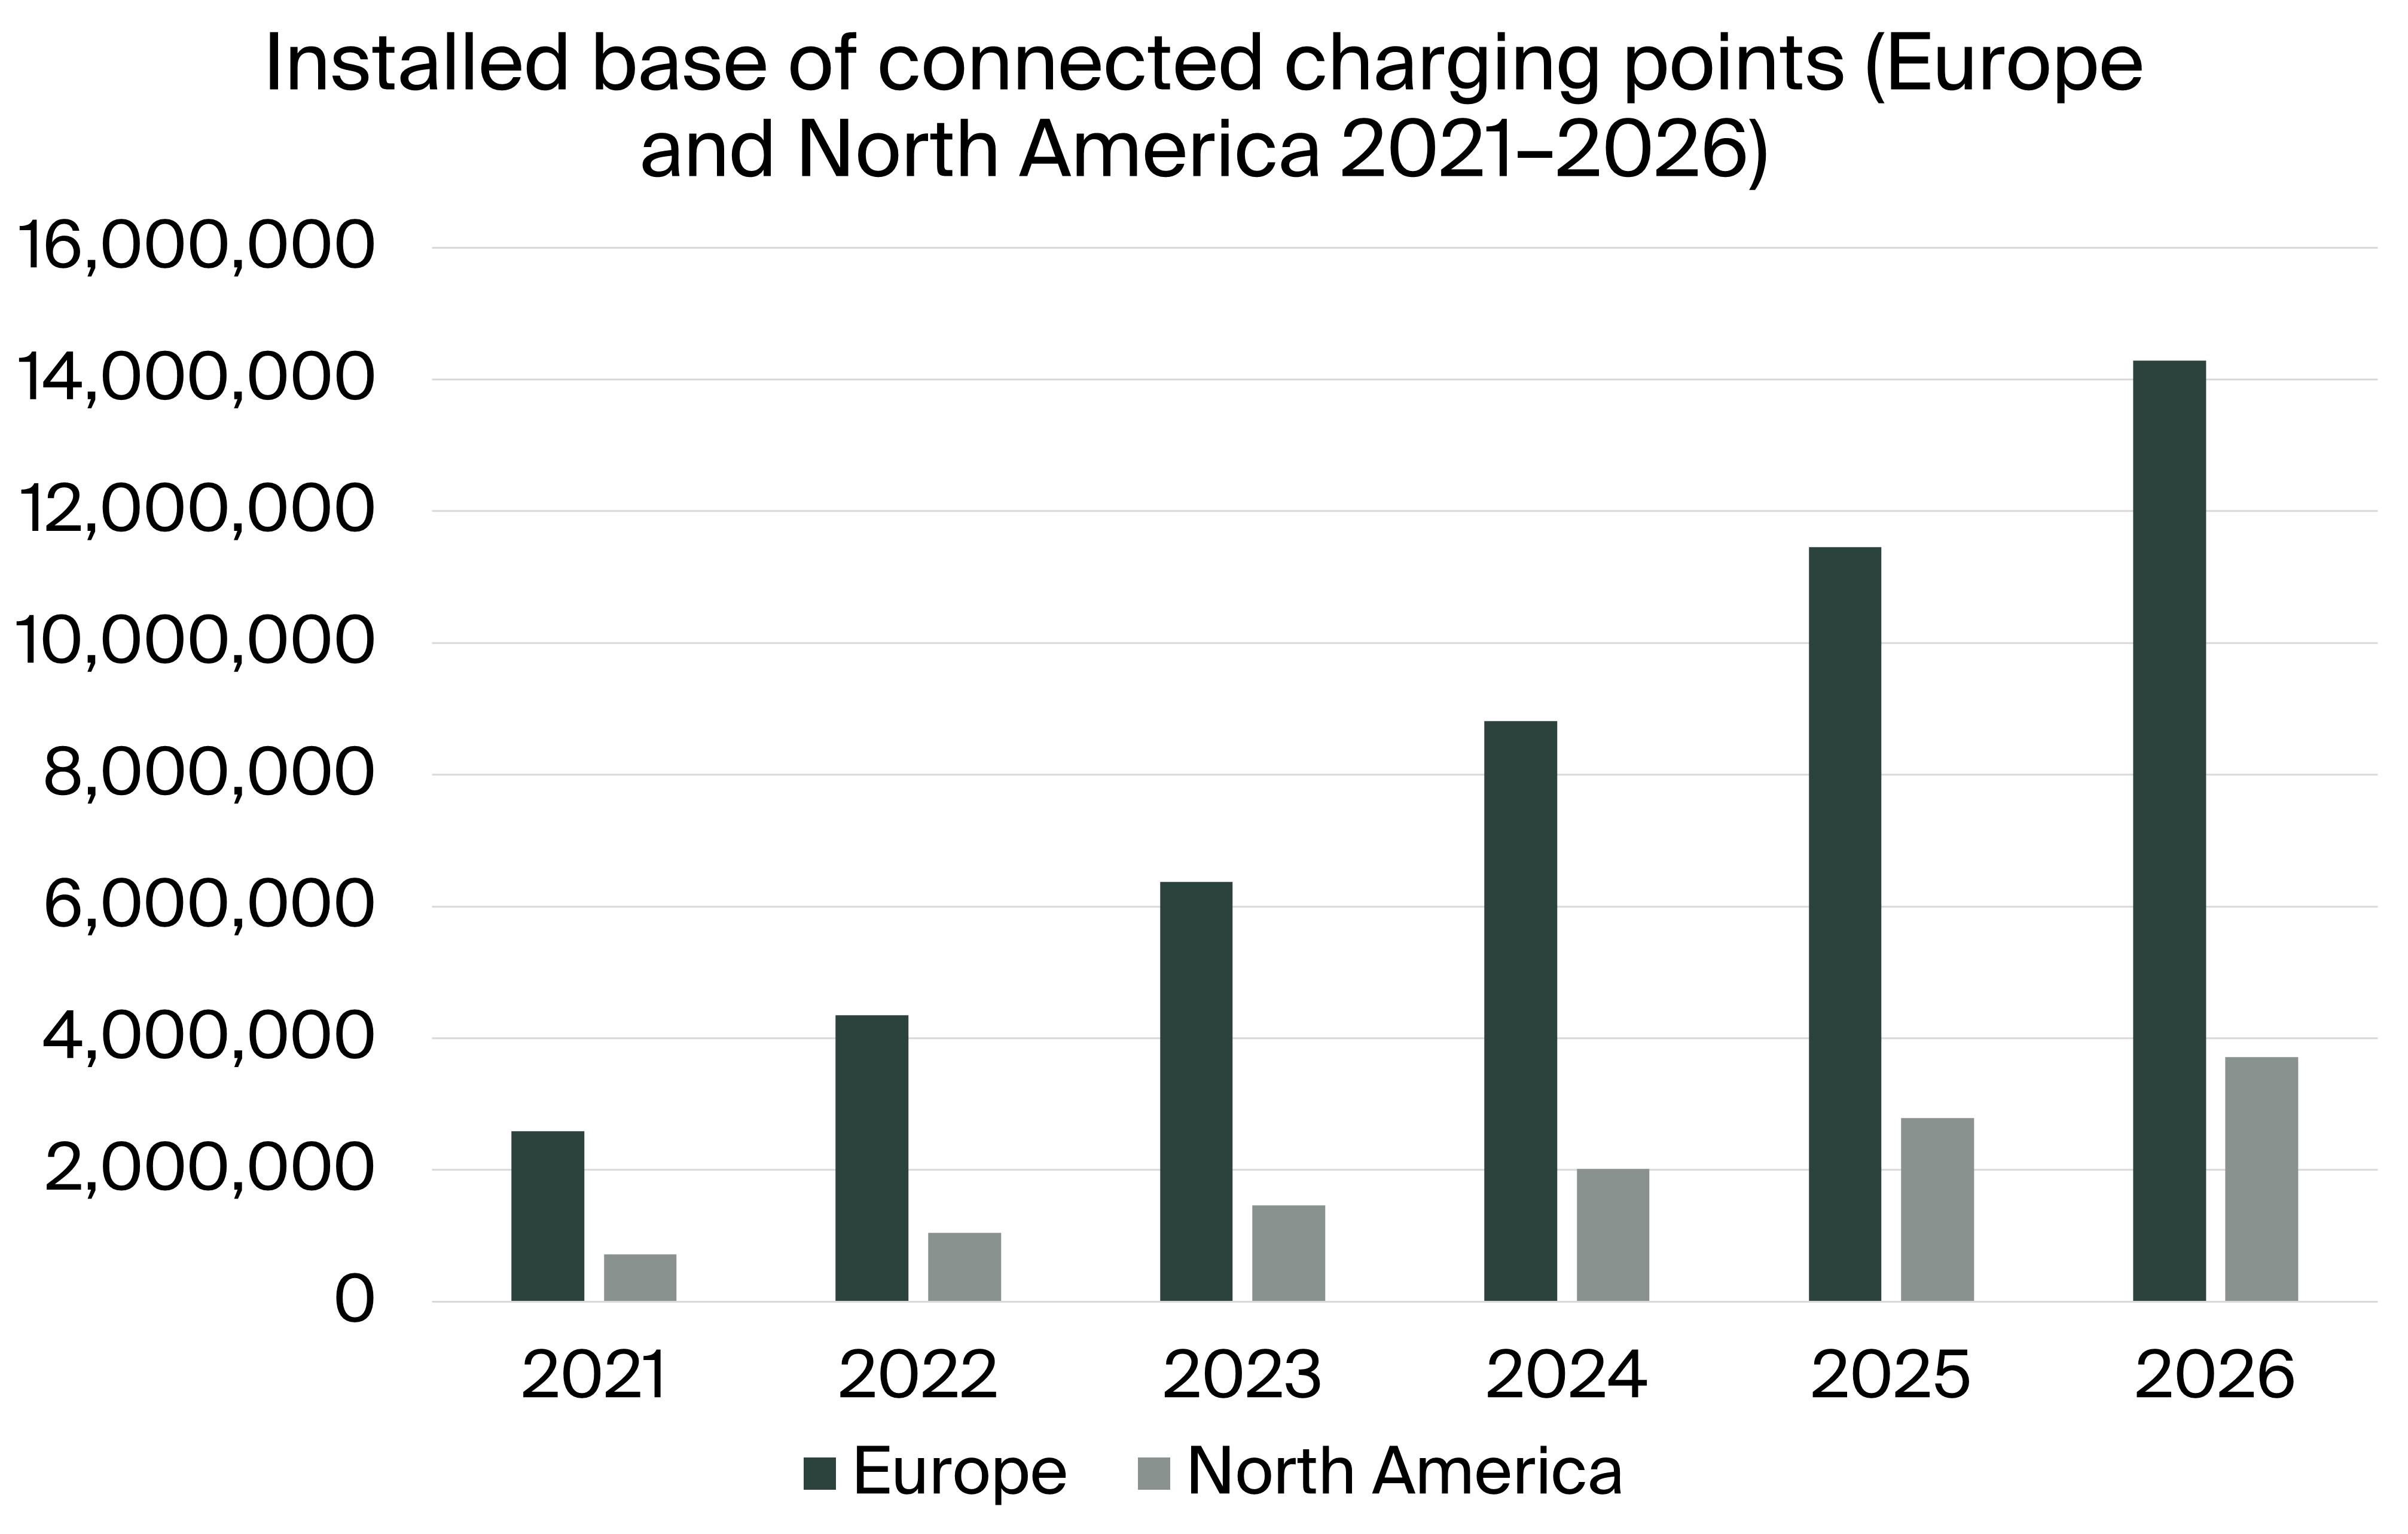 The number of connected EV charging points in Europe and North America to reach 18 million by 2026